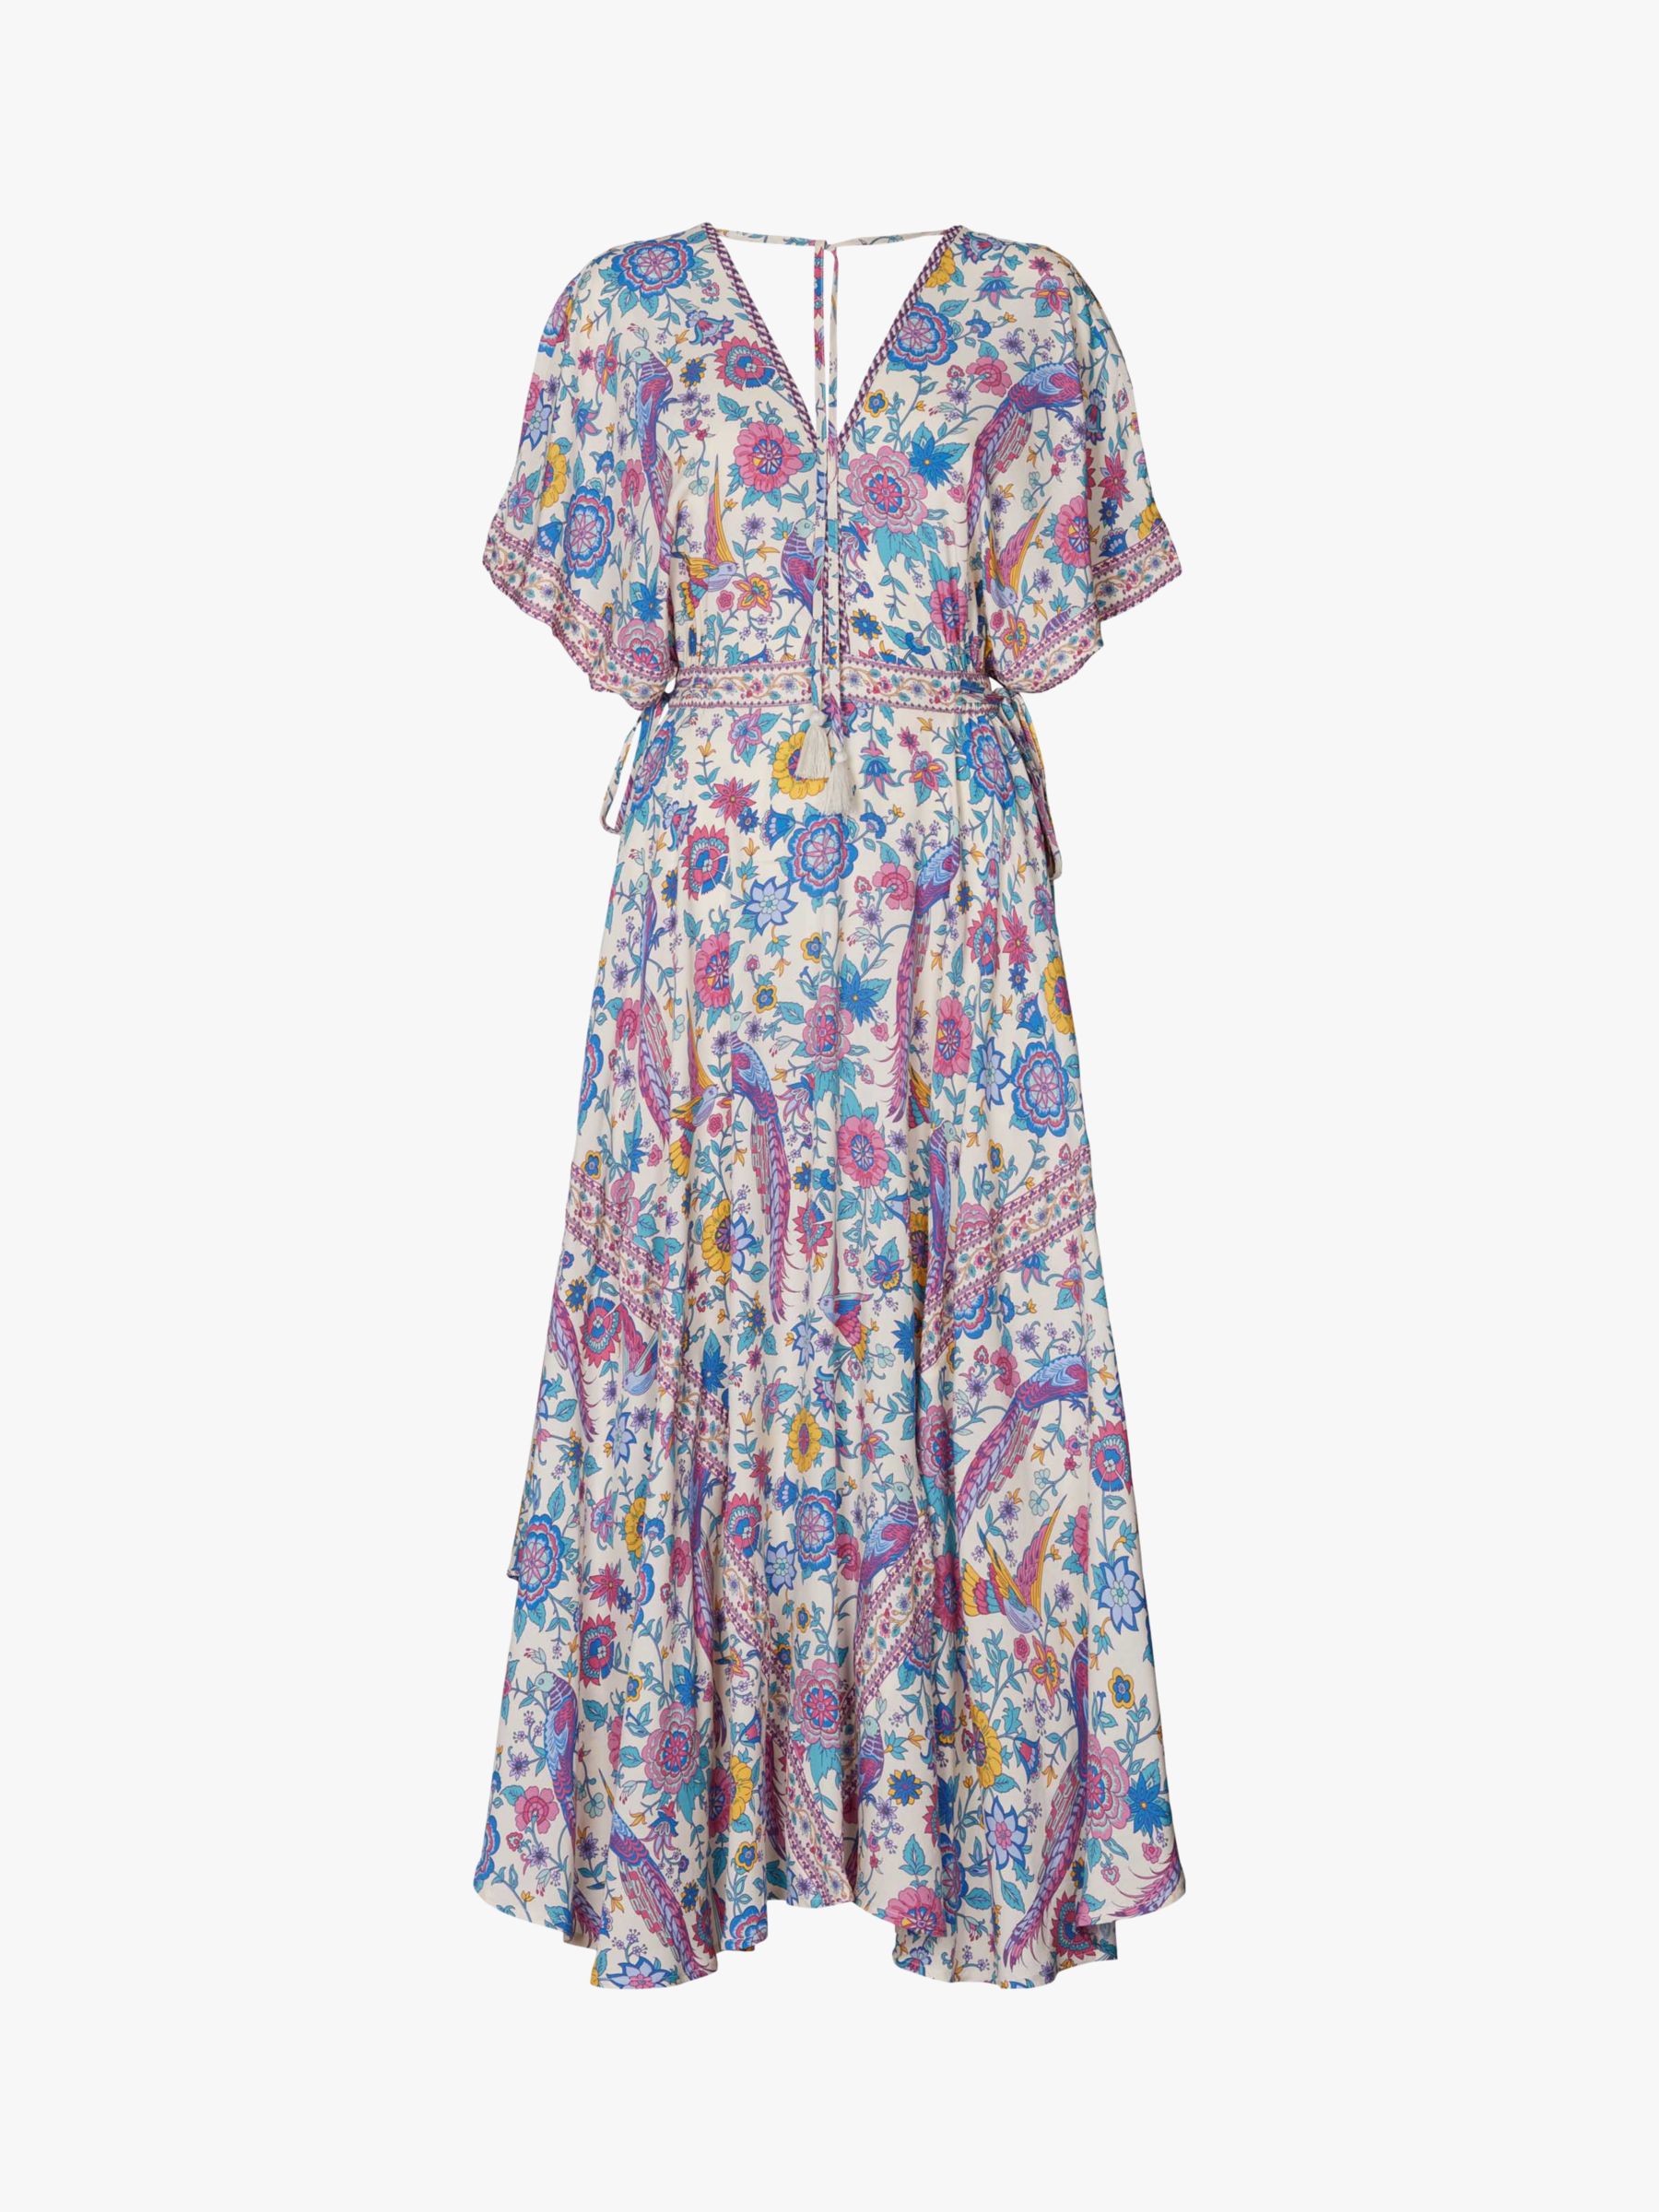 Buy Lollys Laundry Nightingale Floral Dress, Multi Online at johnlewis.com